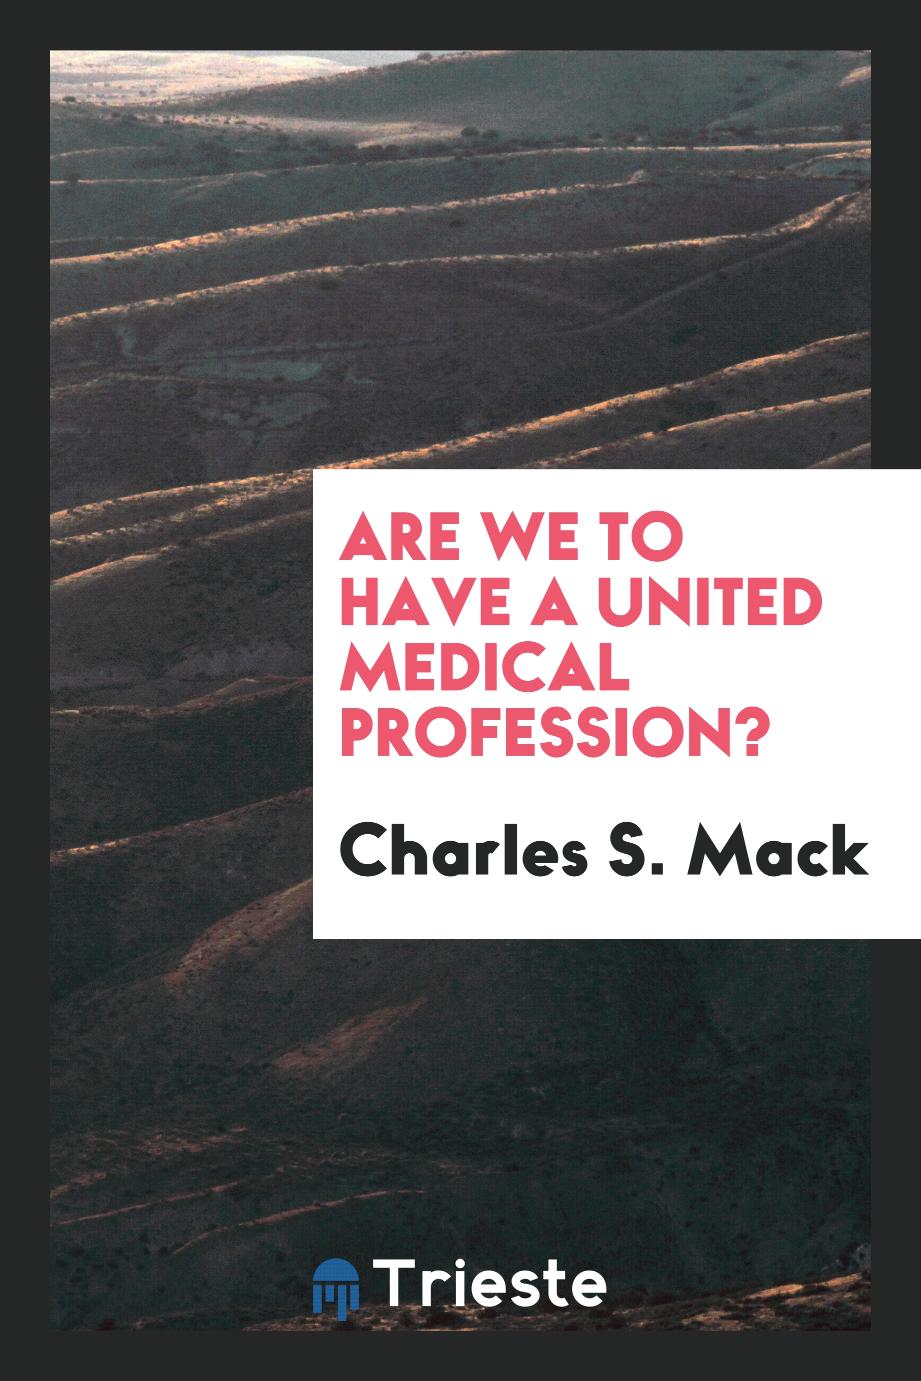 Are we to have a united medical profession?